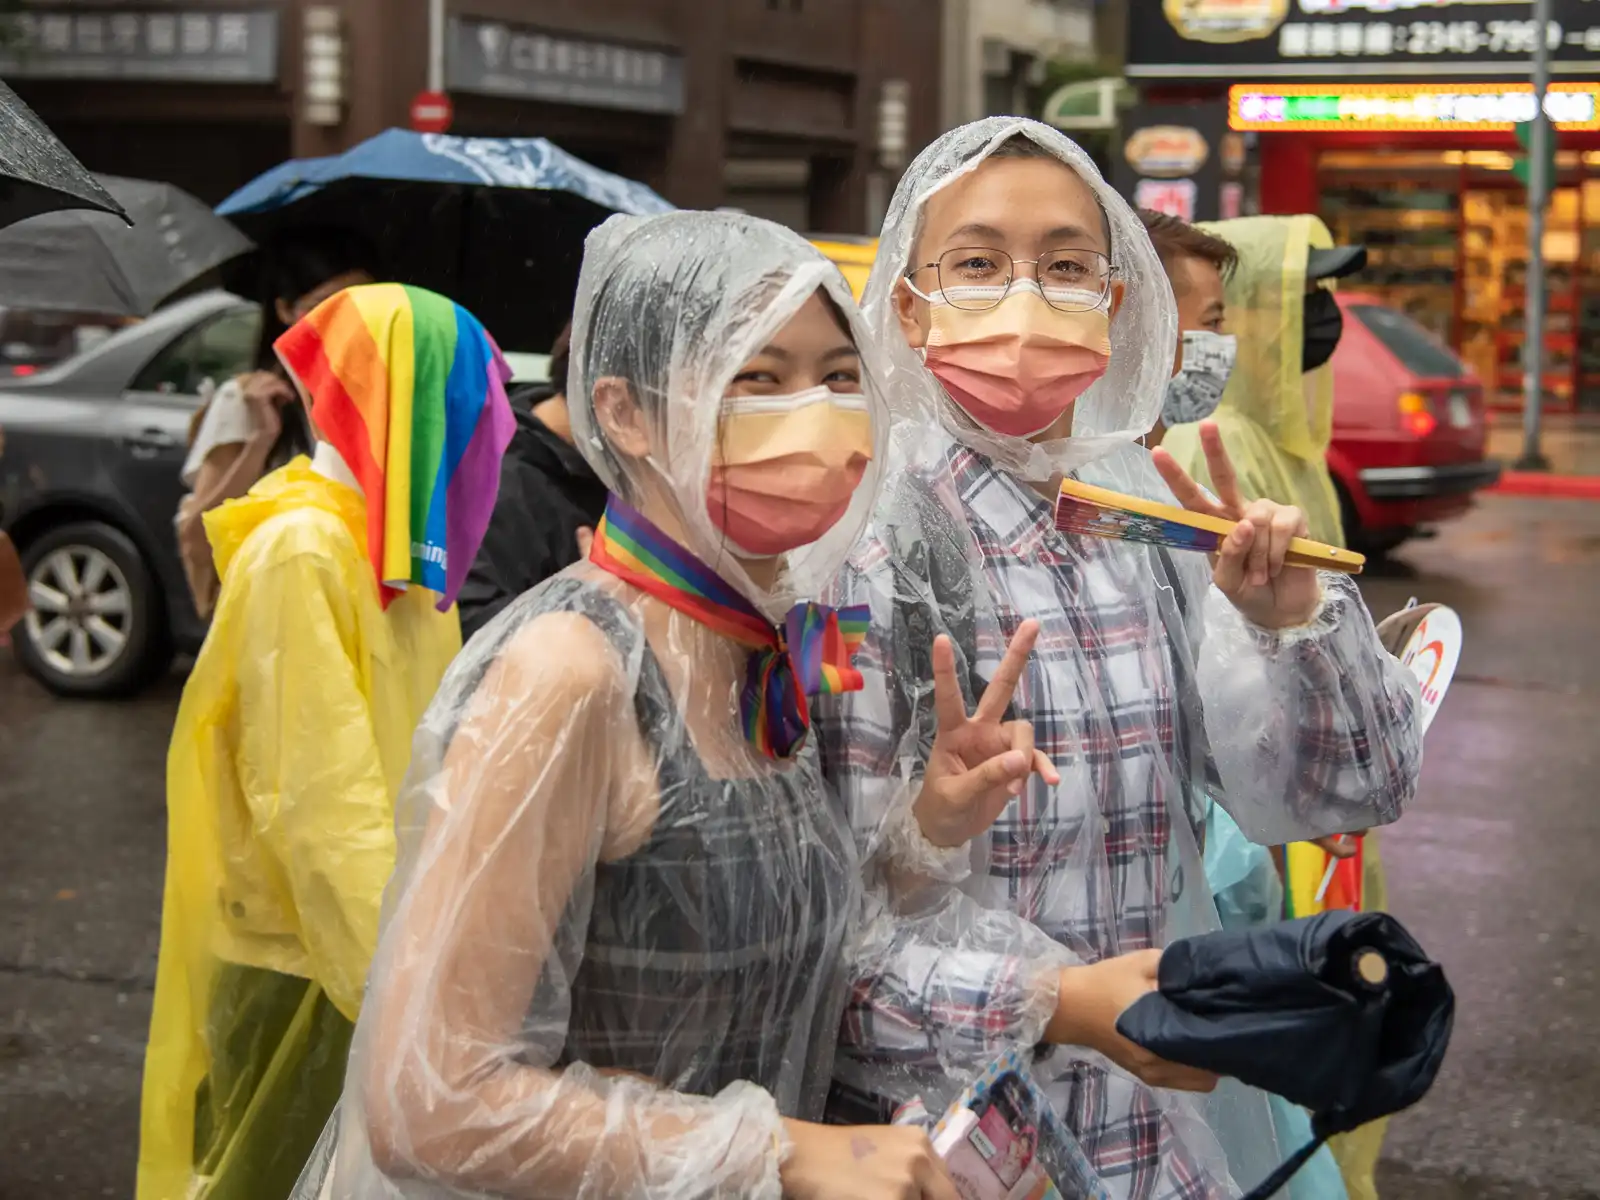 Two marchers in disposable raincoats flash peace signs as the camera.